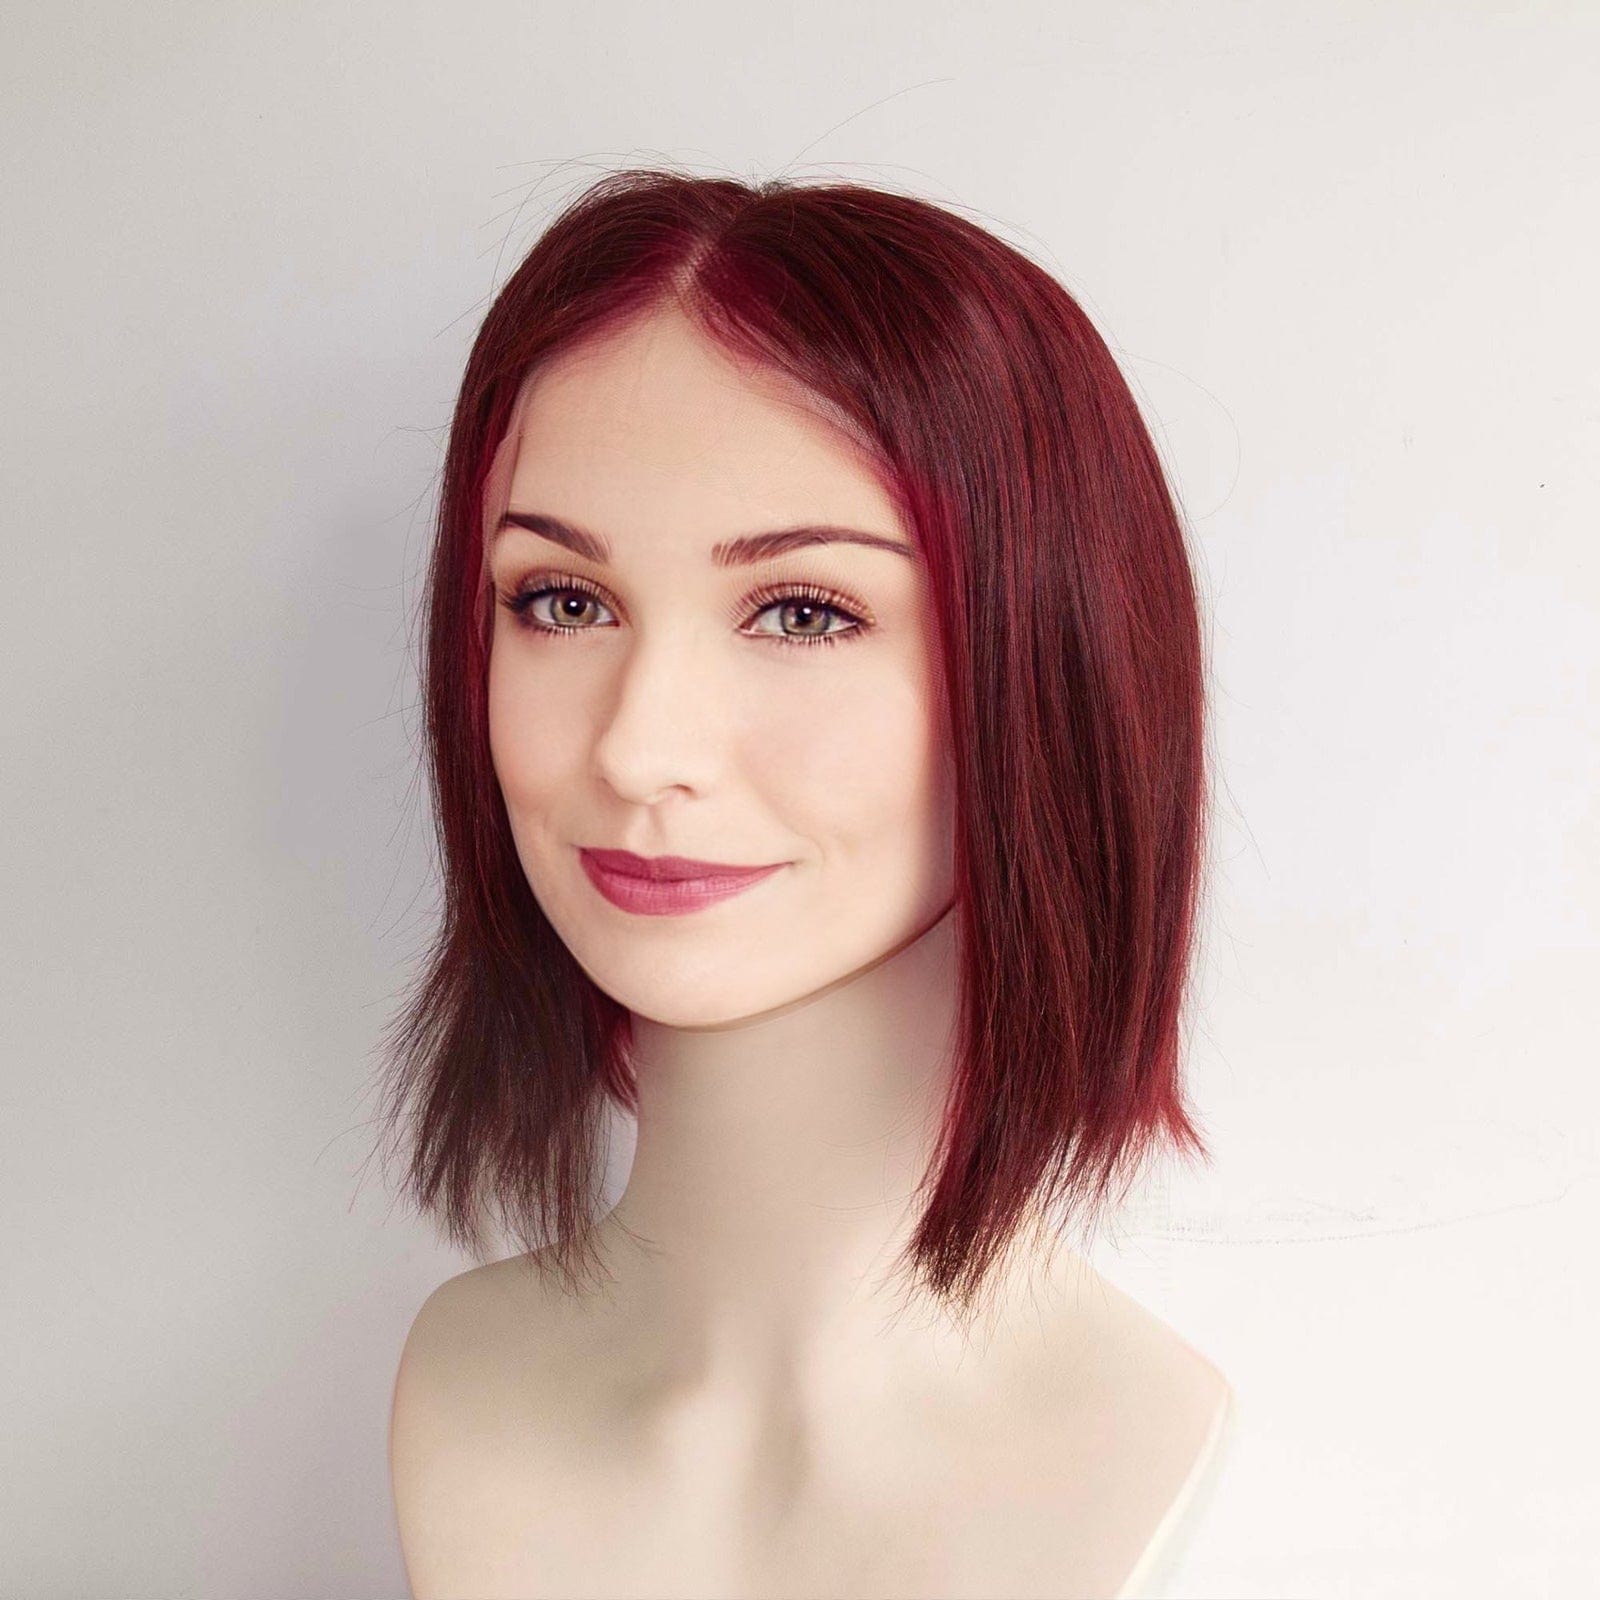 nevermindyrhead Women Dark Red Human Hair Lace Front Short Straight Middle Part Bob Wig